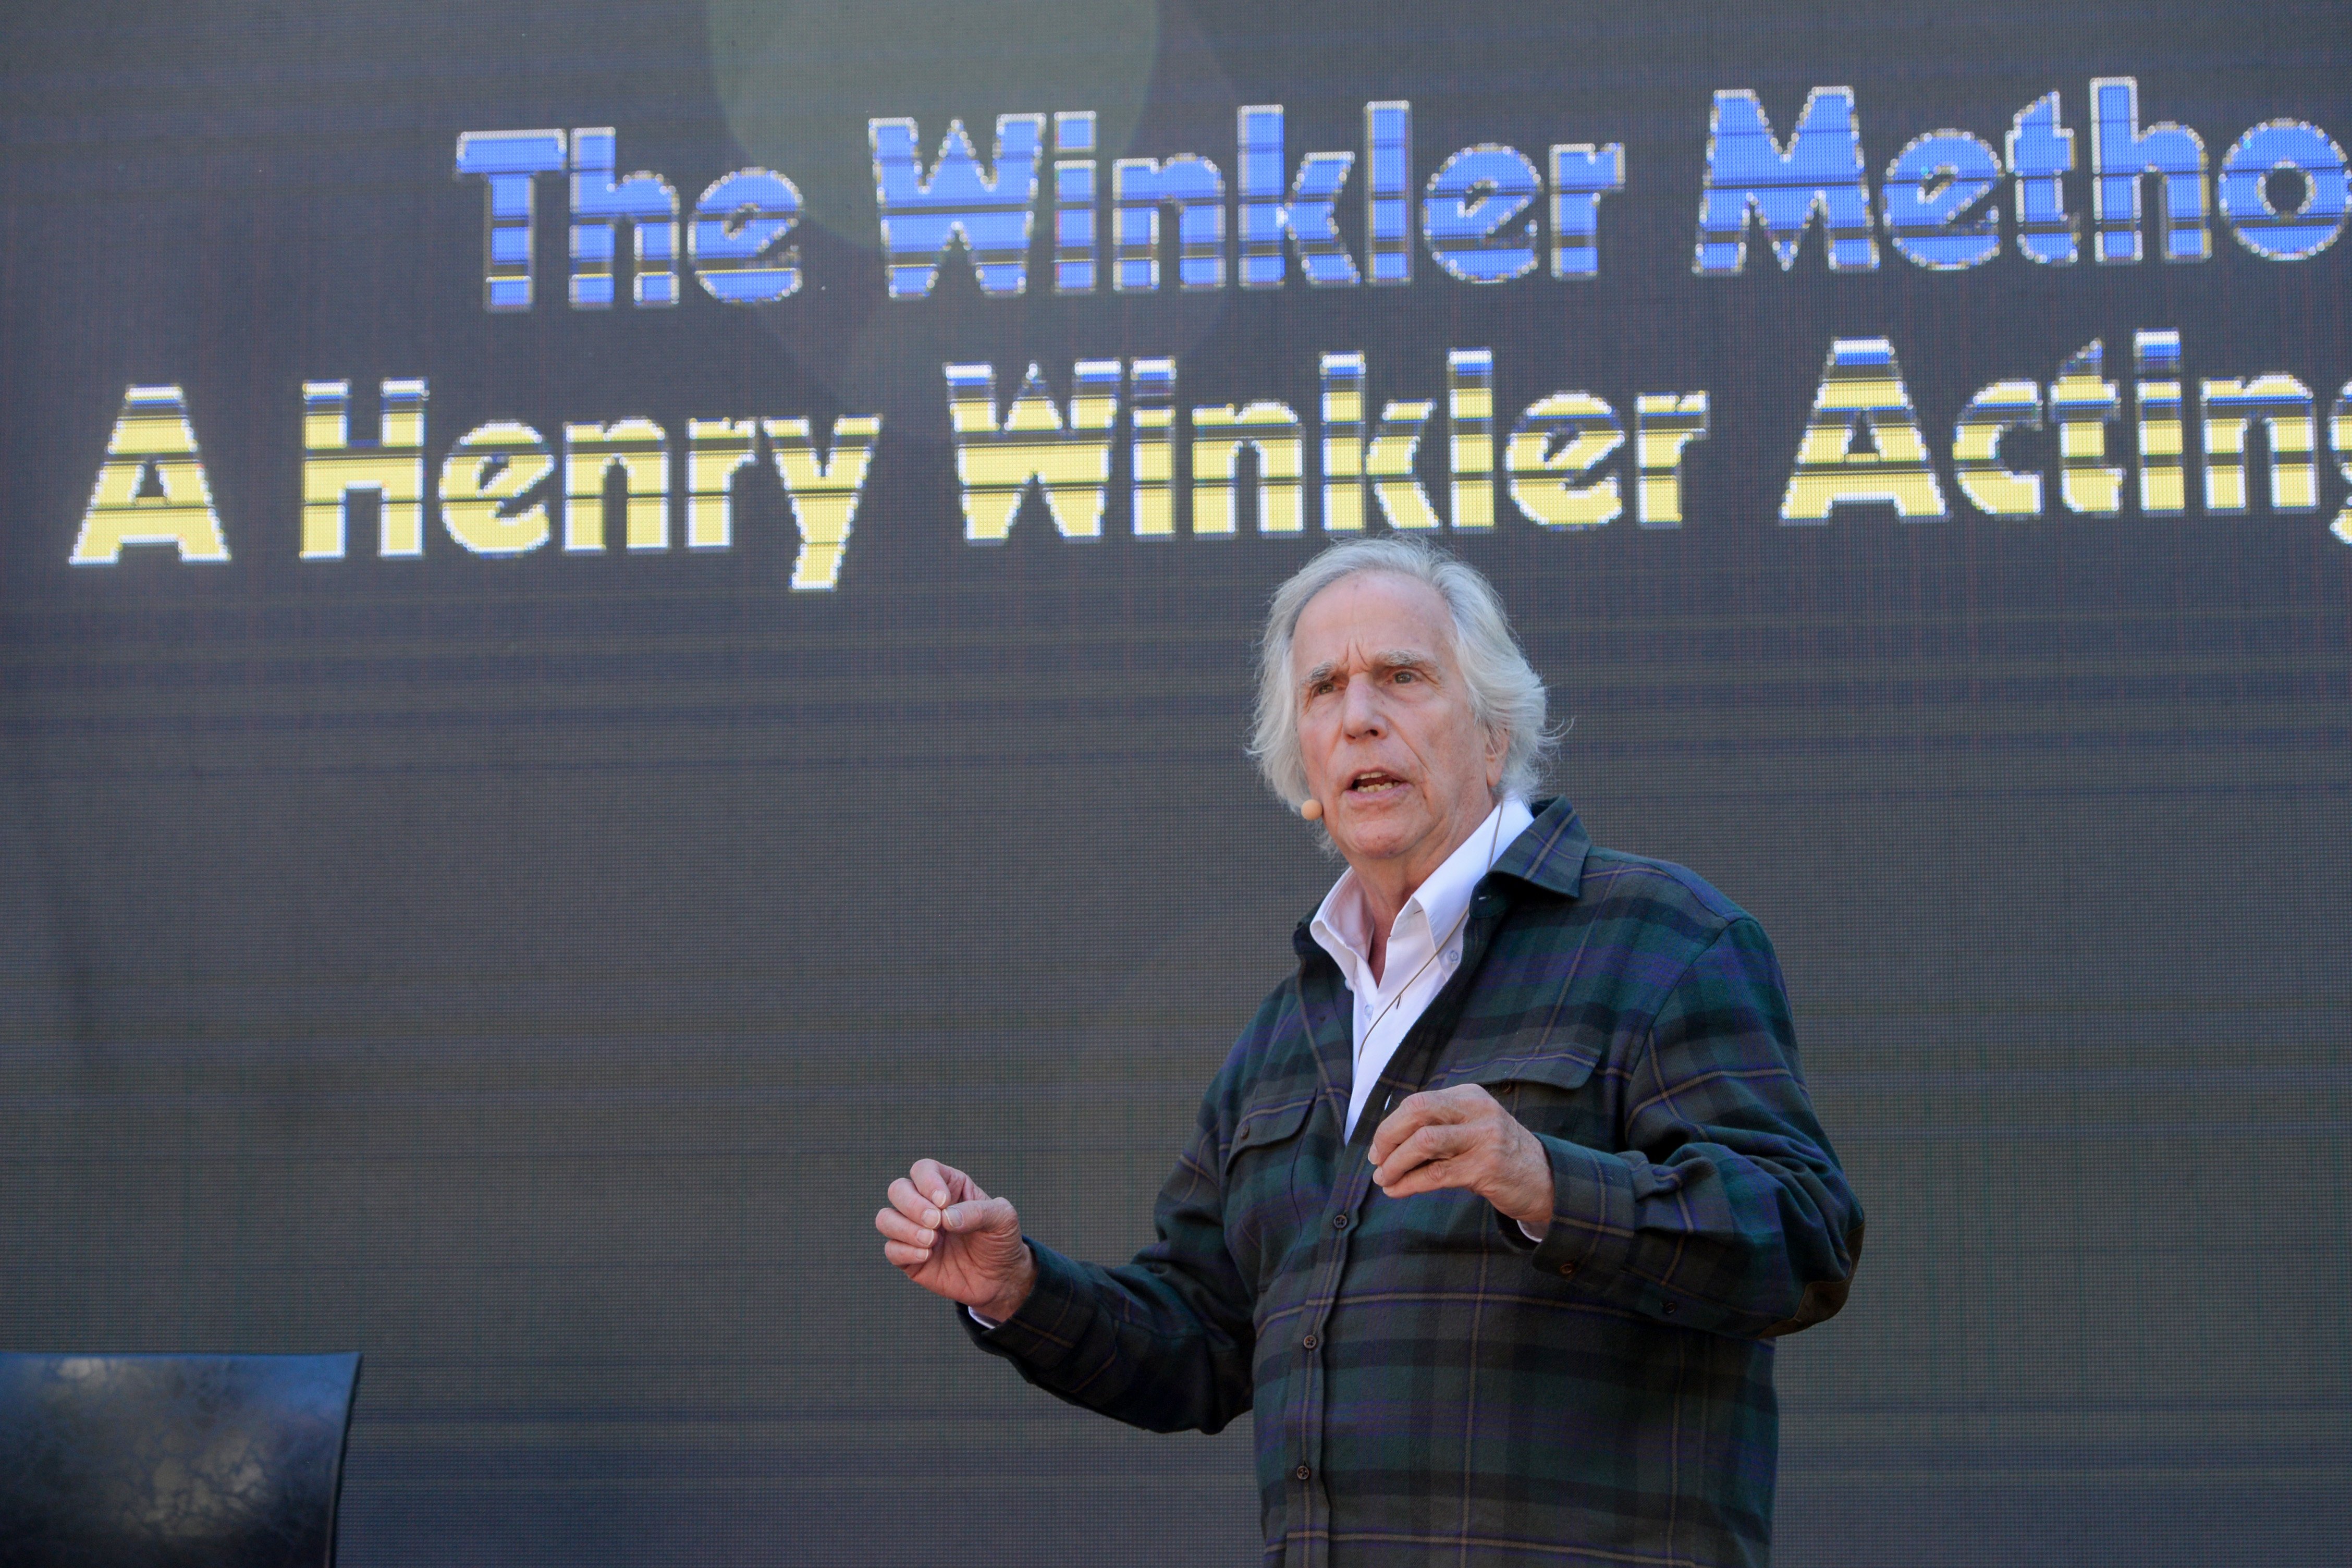 Henry Winkler speaking during The Winkler Method: A Henry Winkler Acting Class at Vulture Festival 2021 at The Hollywood Roosevelt on November 13, 2021 in Los Angeles, California. | Source: Getty Images